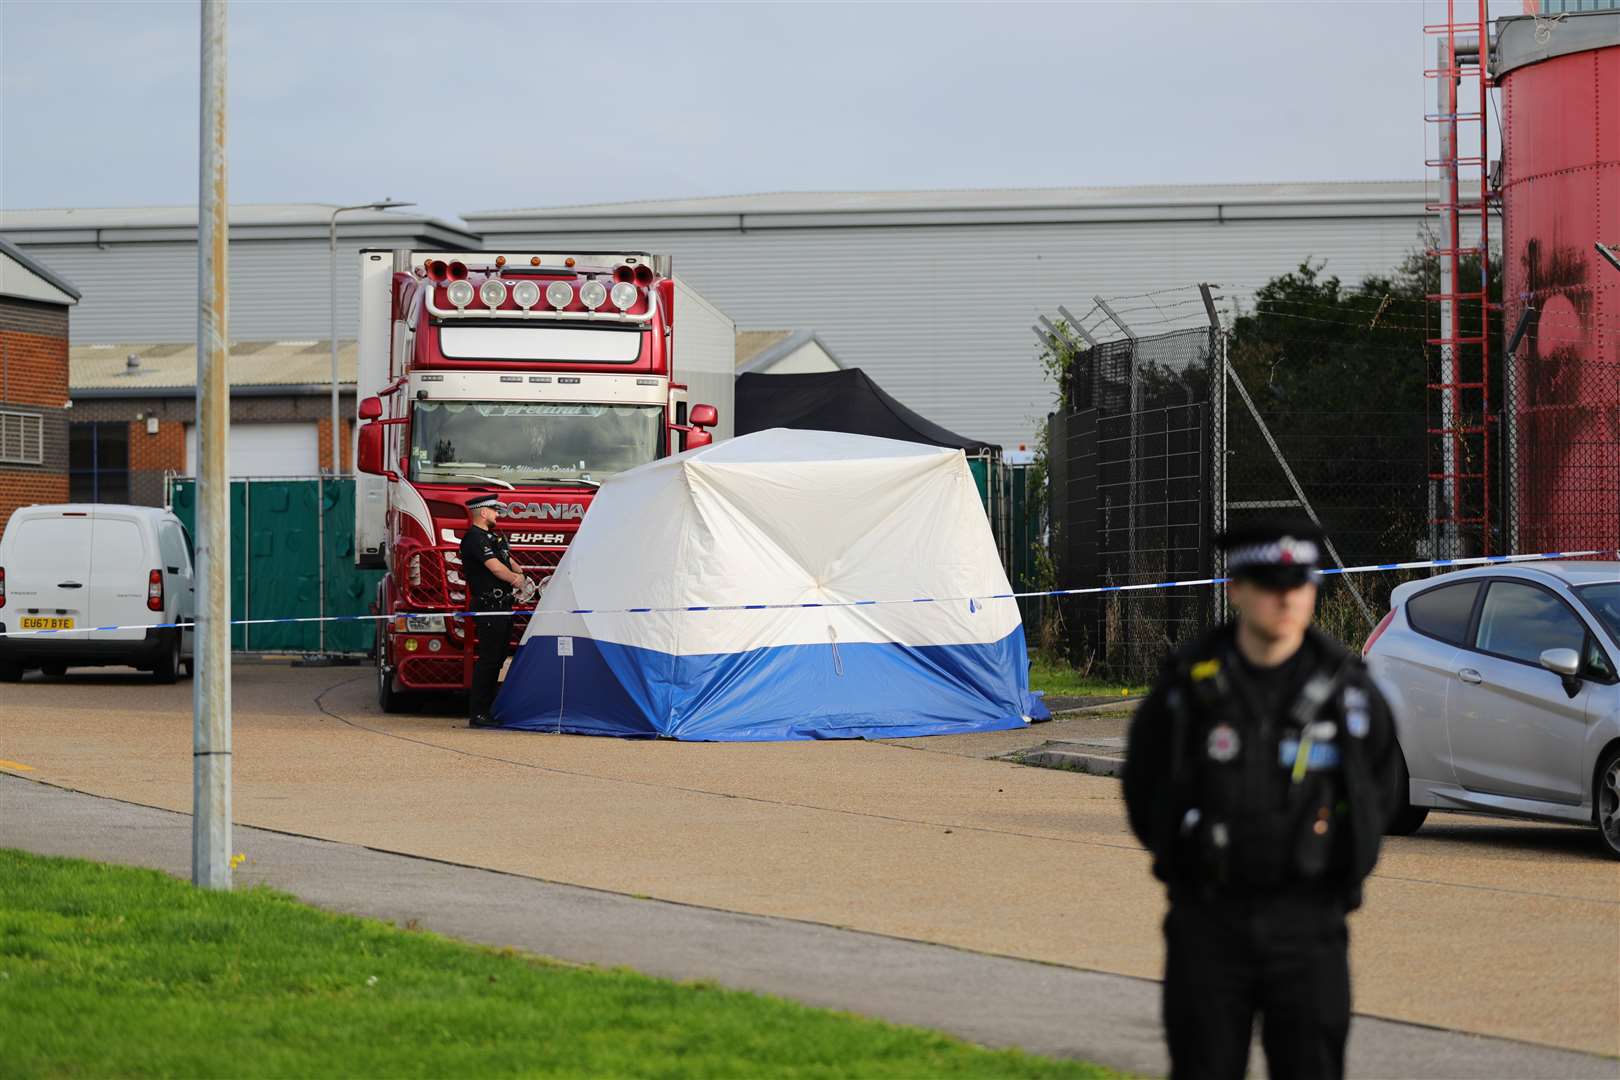 Police activity in 2019 at the Waterglade Industrial Park in Grays, Essex (Aaron Chown/PA)